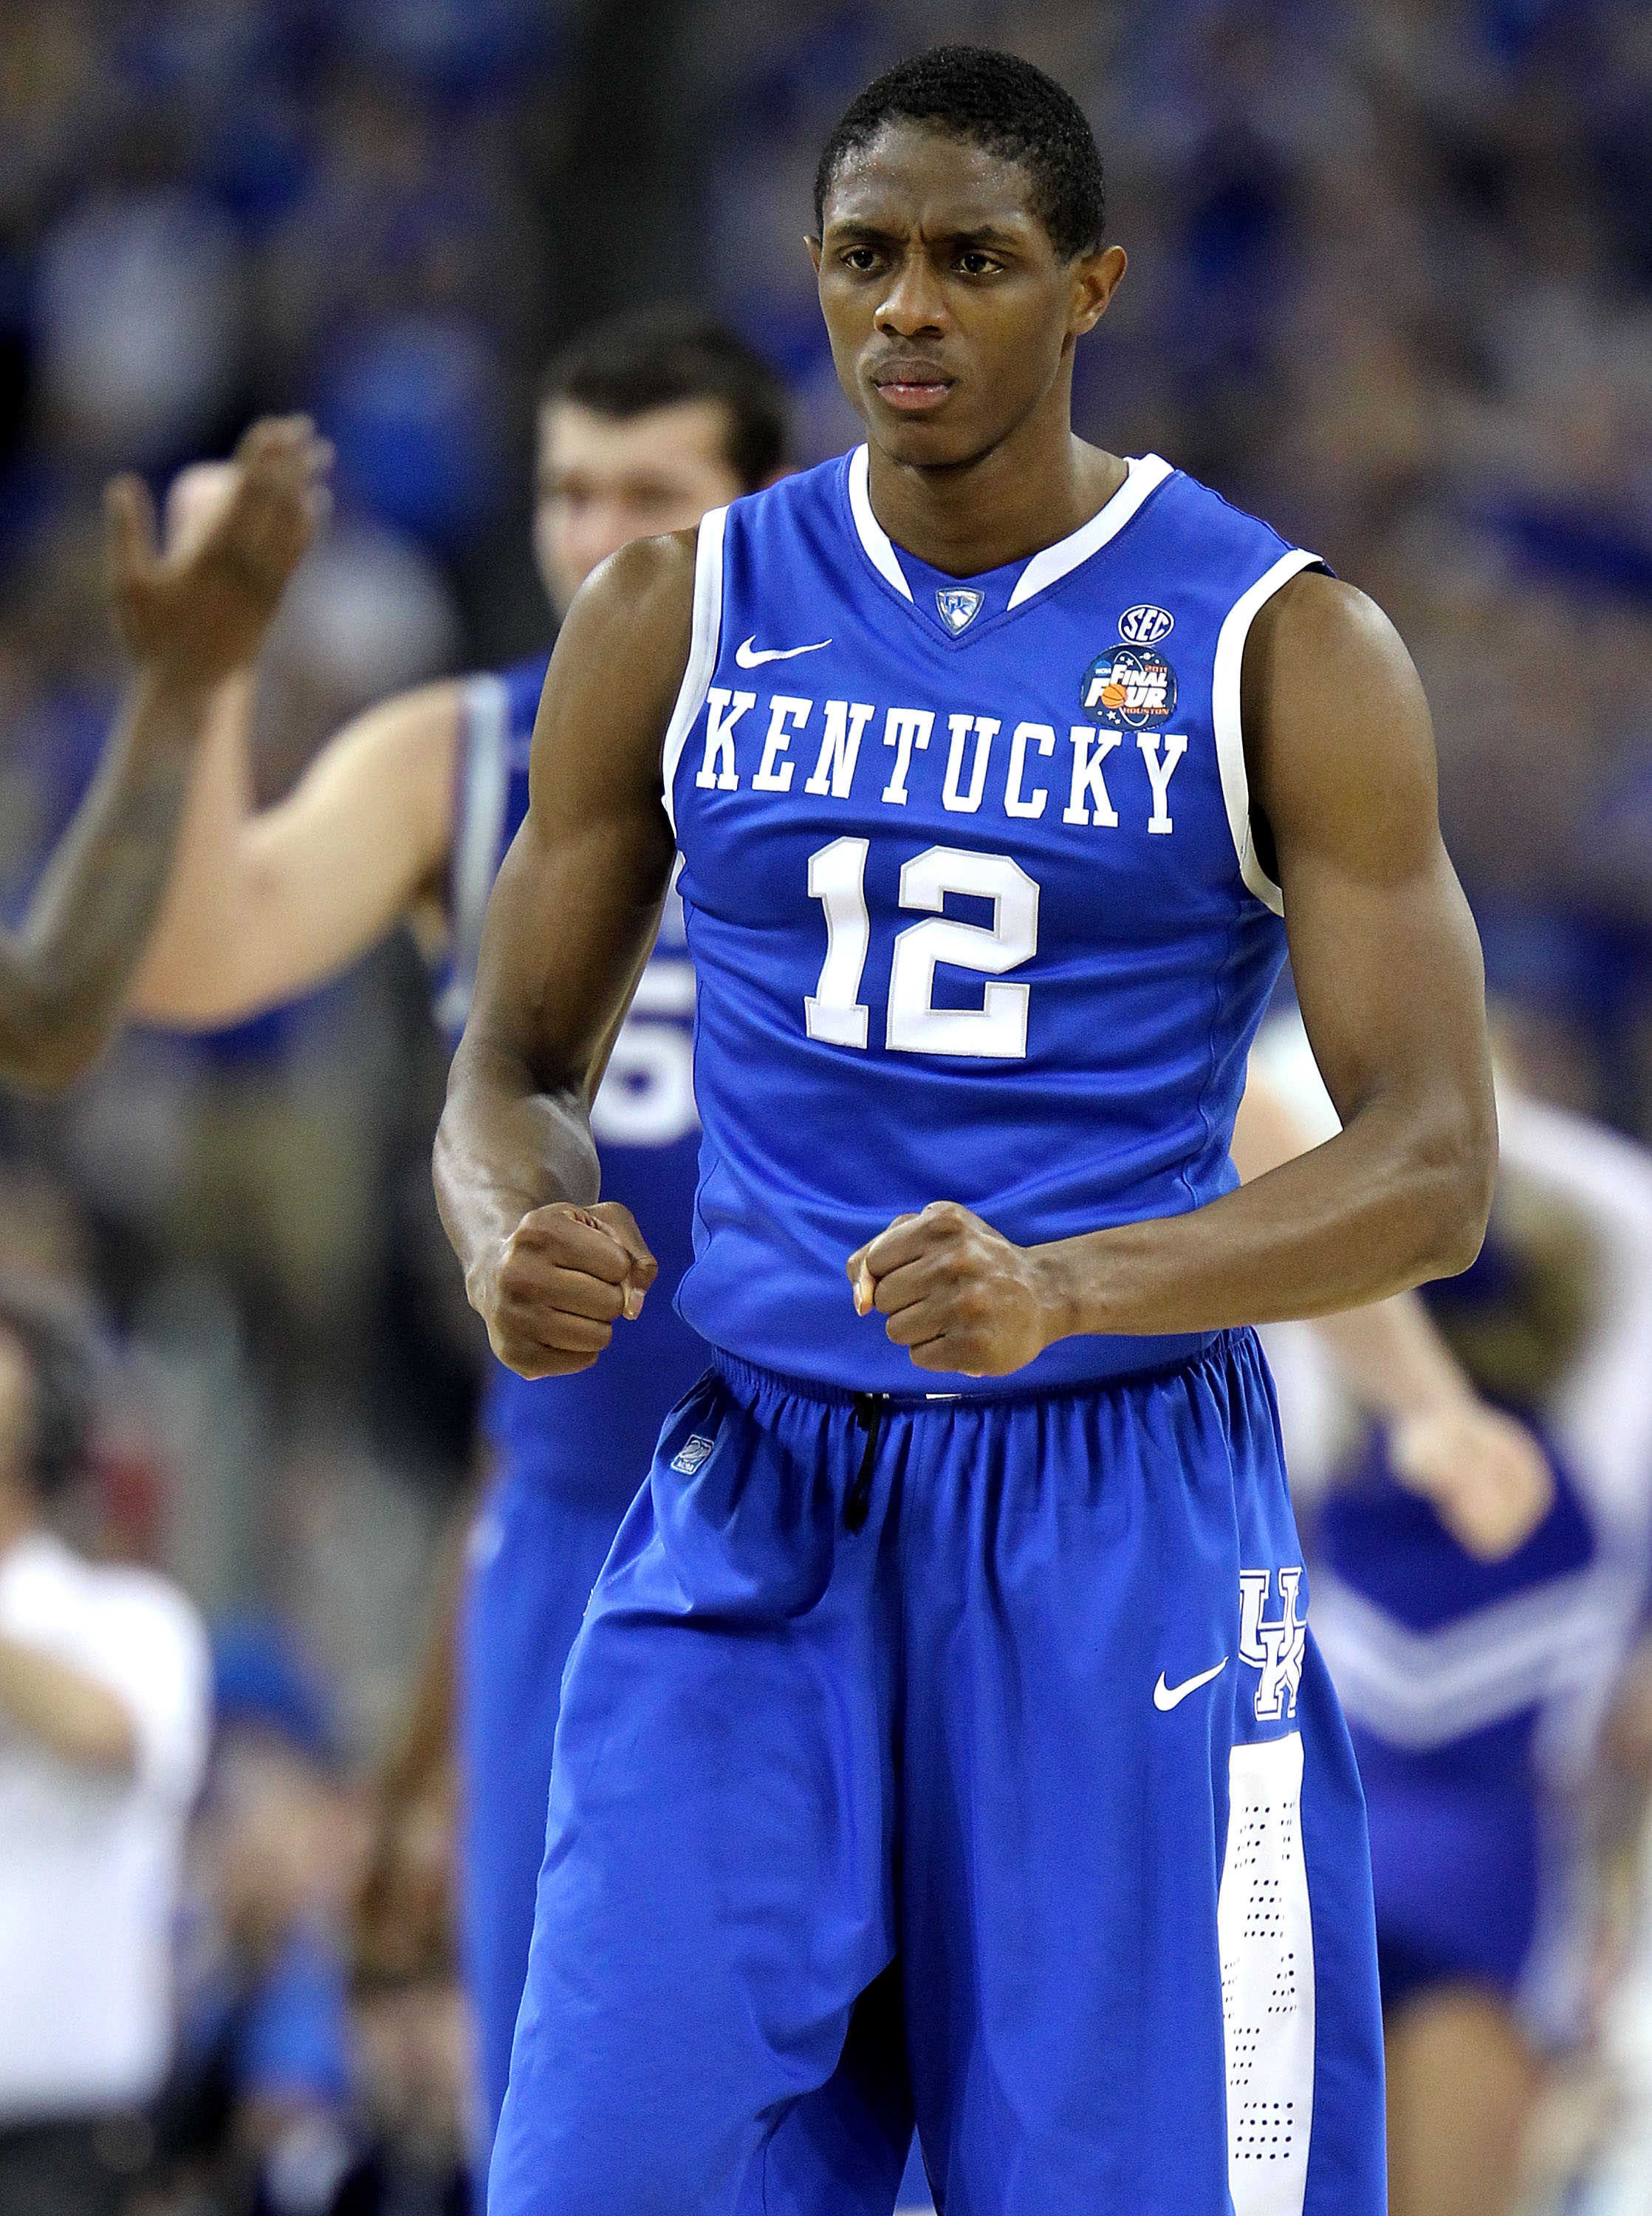 HOUSTON, TX - APRIL 02:  Brandon Knight #12 of the Kentucky Wildcats reacts against the Connecticut Huskies during the National Semifinal game of the 2011 NCAA Division I Men's Basketball Championship at Reliant Stadium on April 2, 2011 in Houston, Texas.